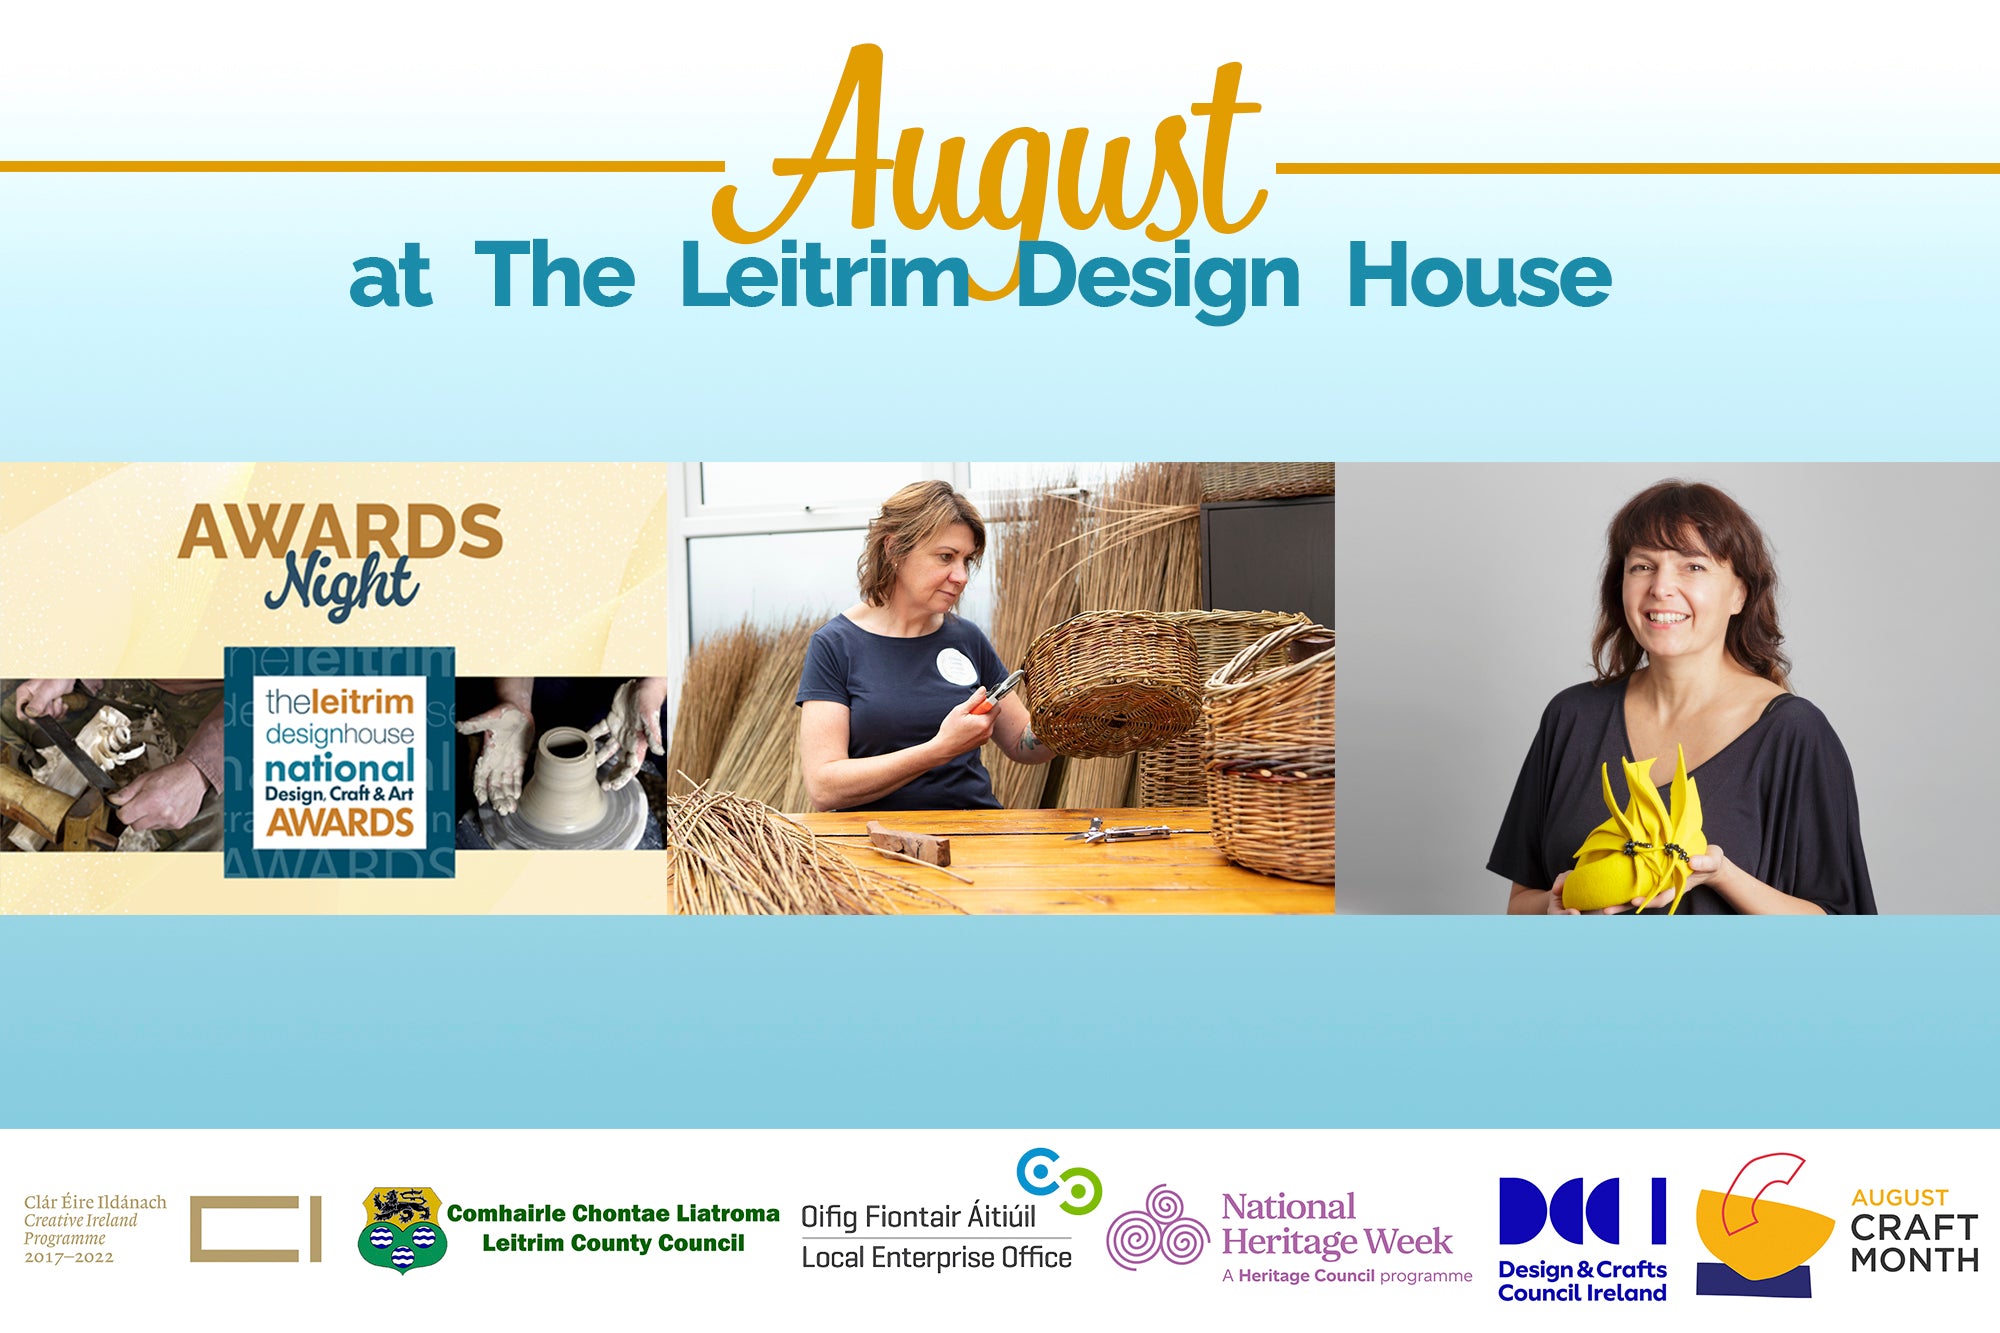 August at The Leitrim Design House